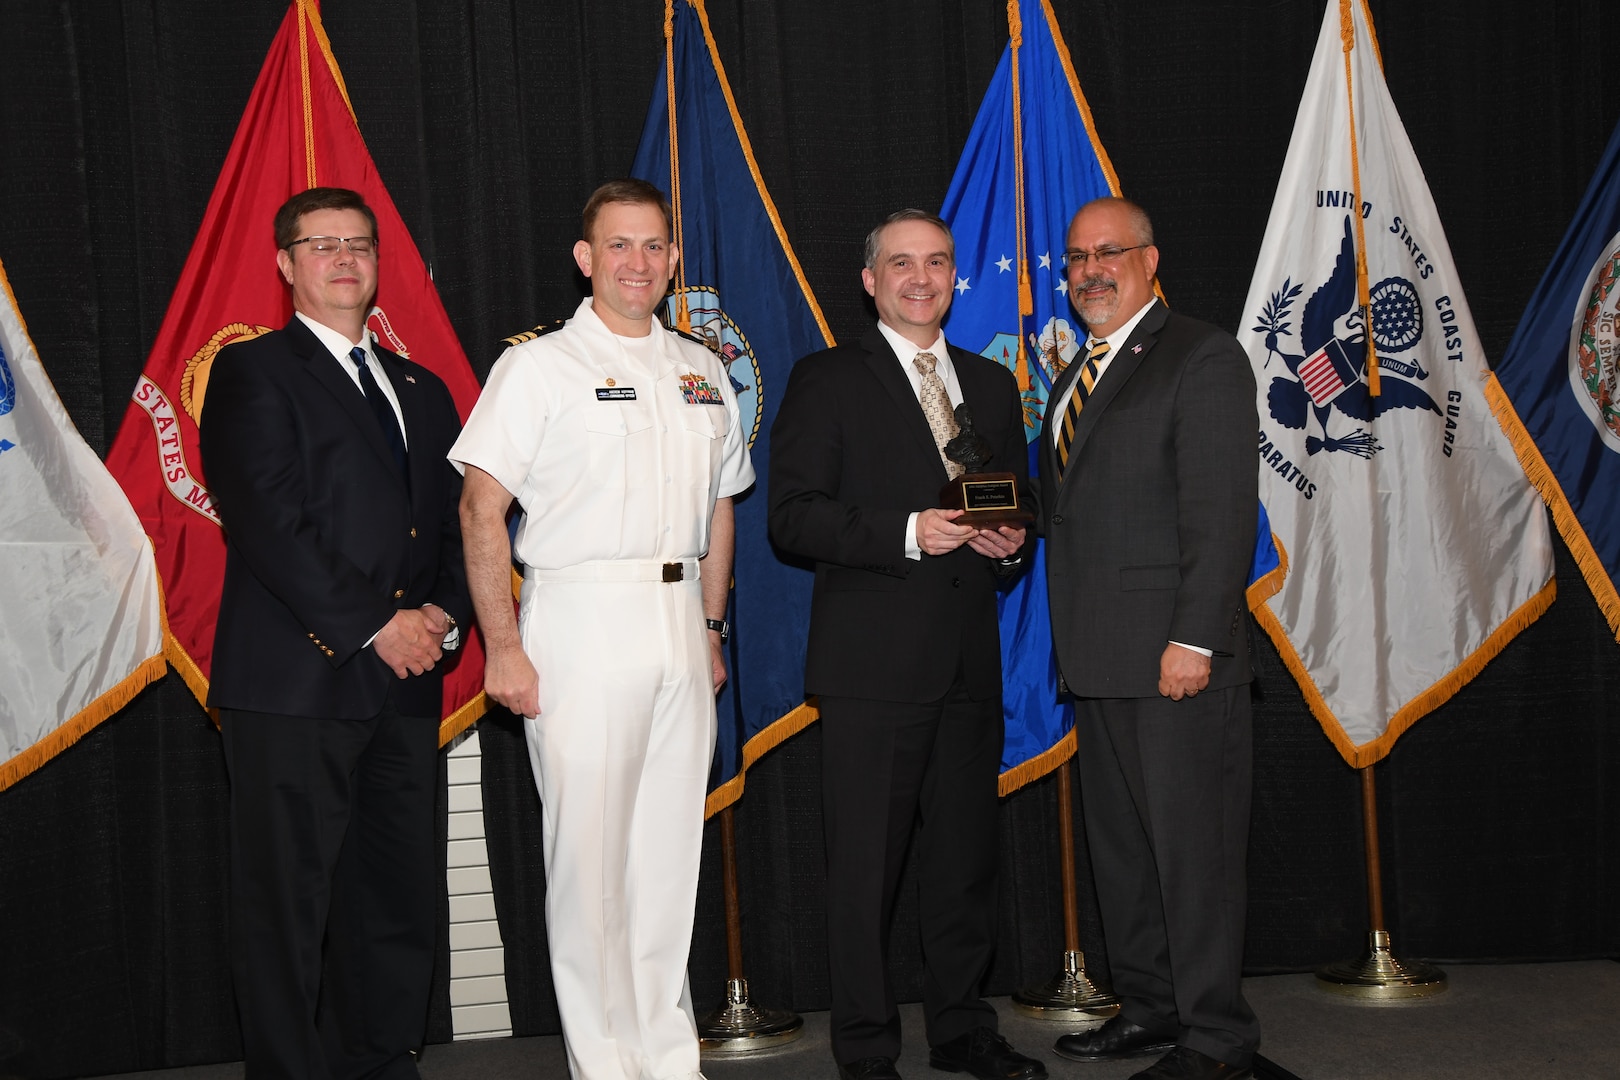 IMAGE: Patrick Freemyers is presented the John Adolphus Dahlgren Award at Naval Surface Warfare Center Dahlgren Division's annual awards ceremony, Apr. 26 at the Fredericksburg Expo and Conference Center.

The Dahlgren Award is named for Rear Adm. John A. Dahlgren – who is considered the "Father of Modern Naval Ordnance" - and honors individuals with significant achievement in science, engineering or management.